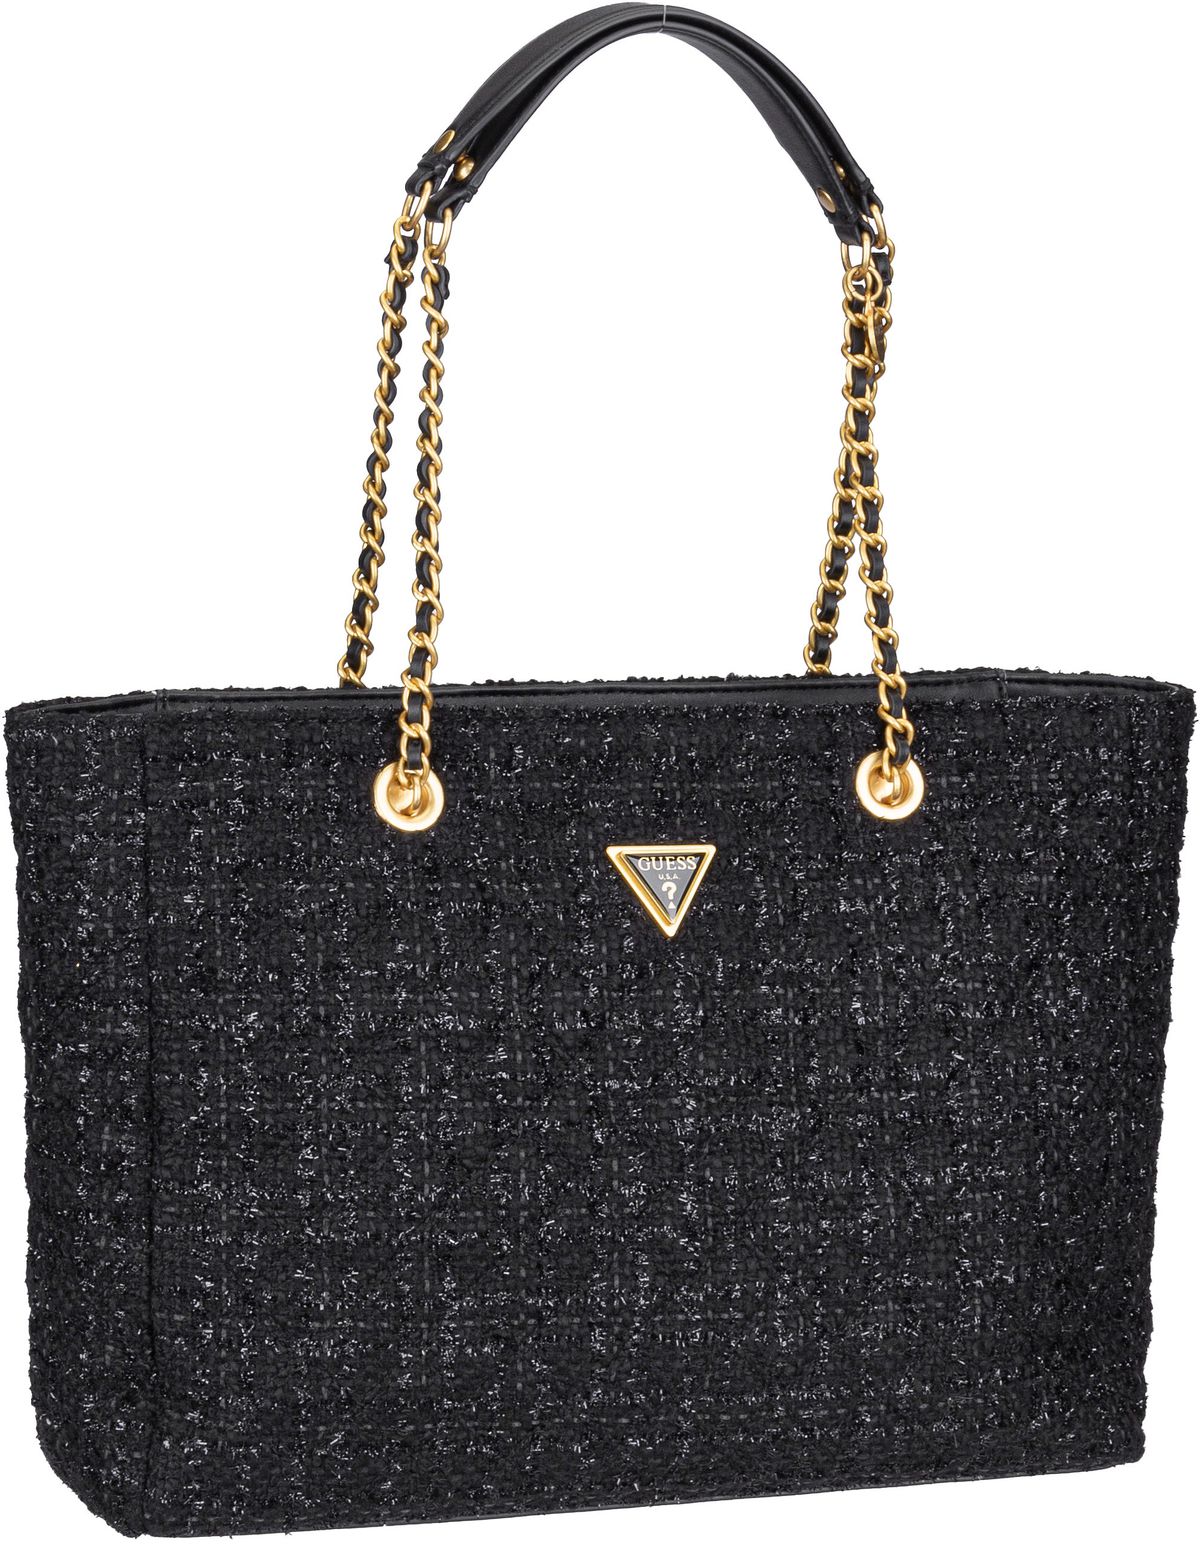 Guess Guess Giully Tote Tweed in Schwarz (12.6 Liter), Shopper